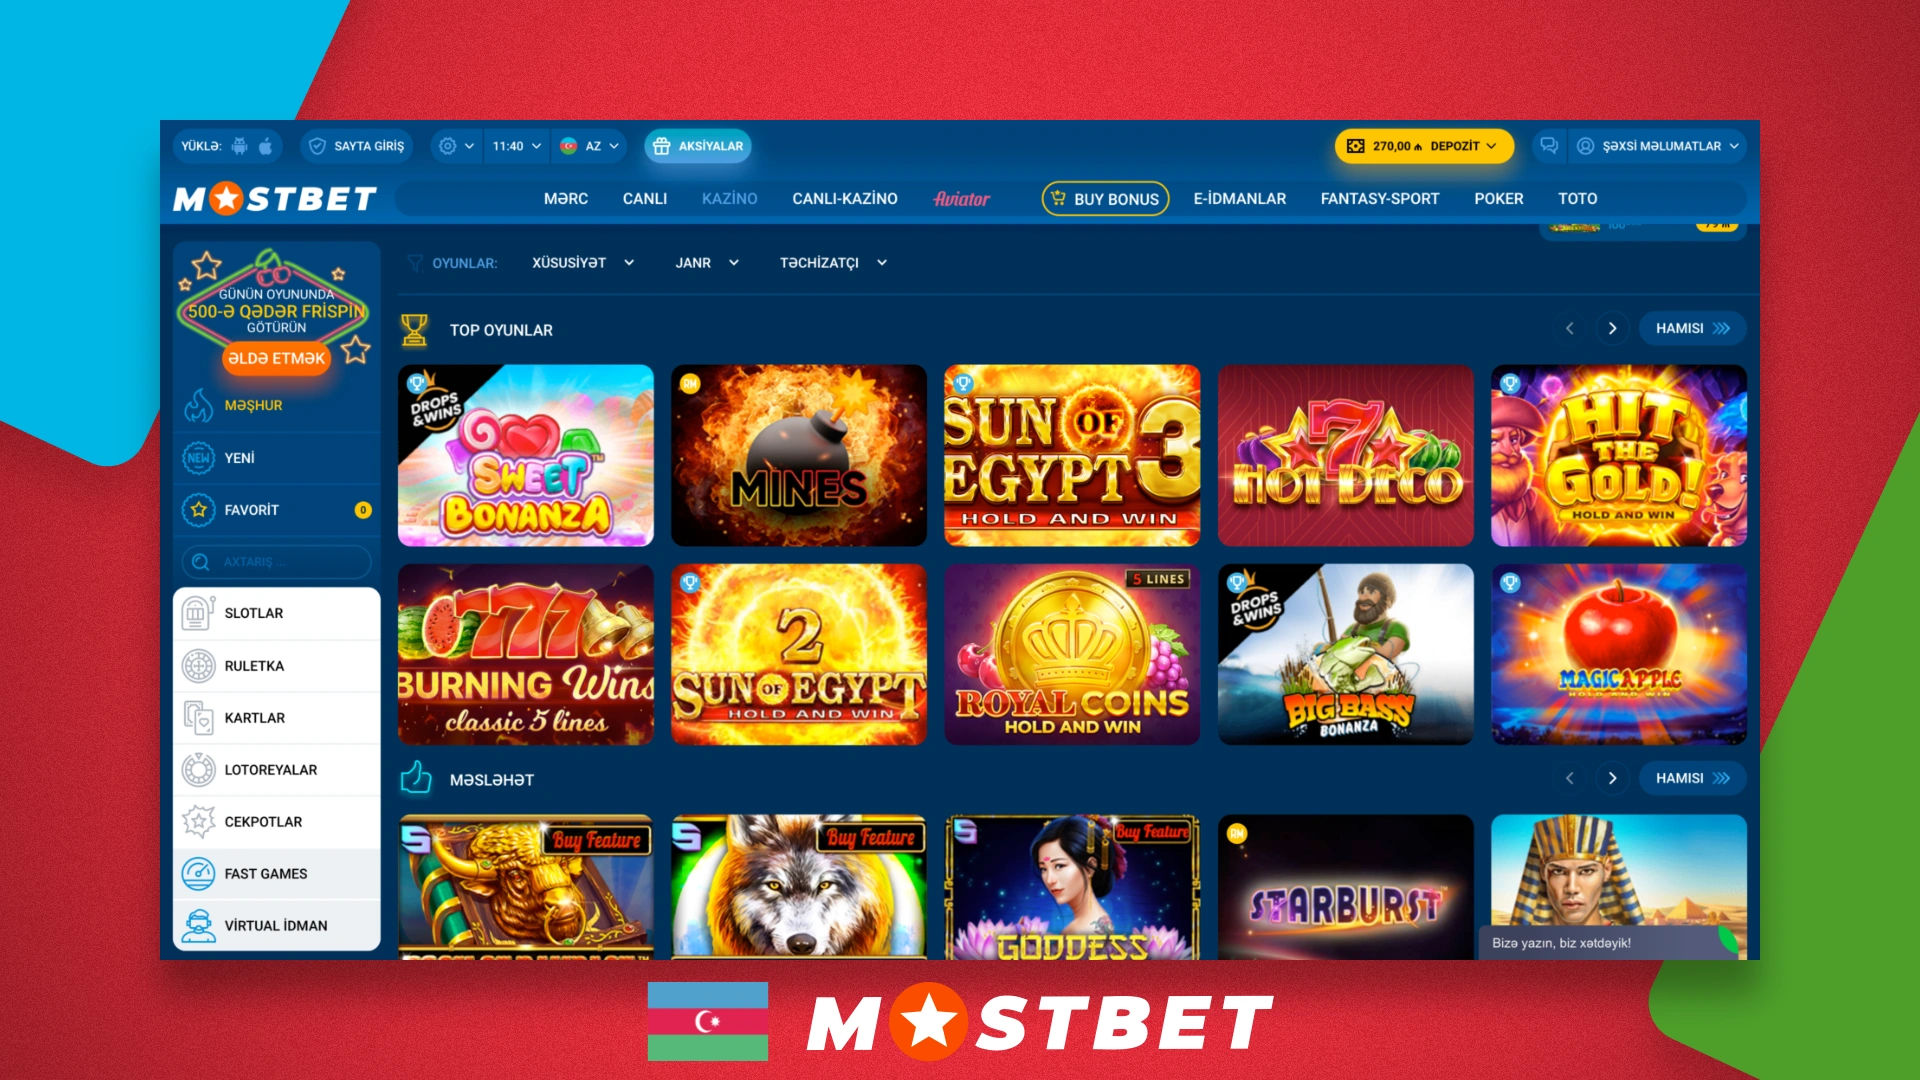 A separate section with online casinos on Mostbet website